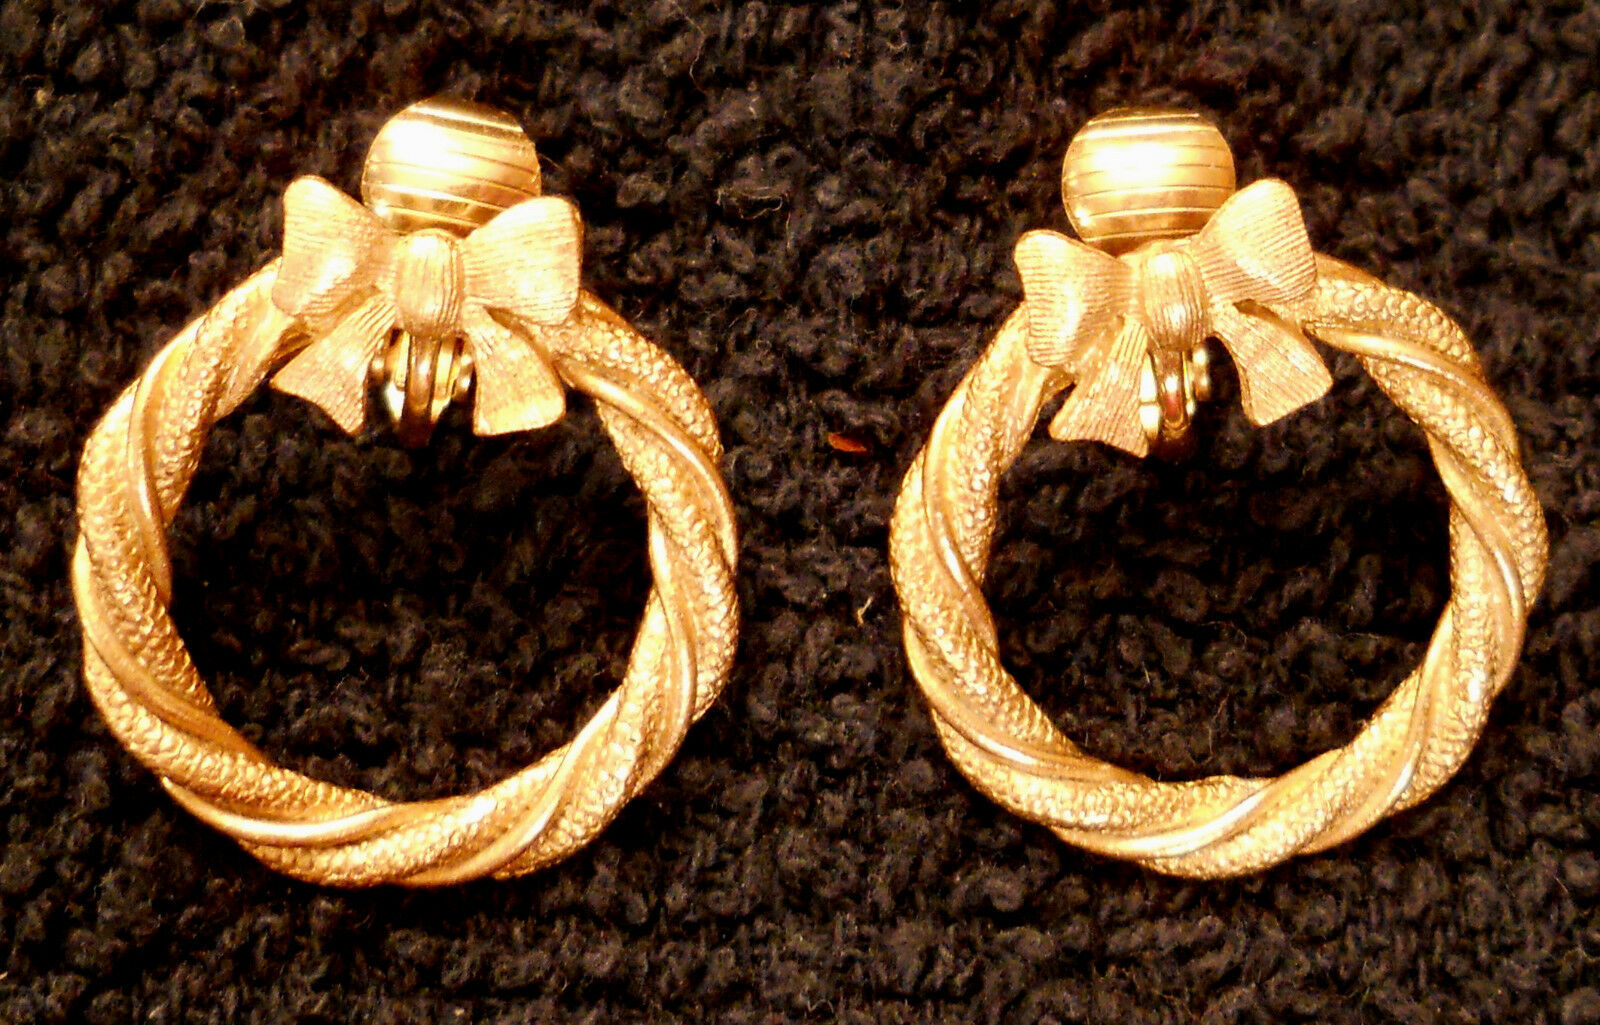 Primary image for Avon Wreath Earrings Clip On VTG Gold Plated Hoops Hypo-Allergenic Nickel Free